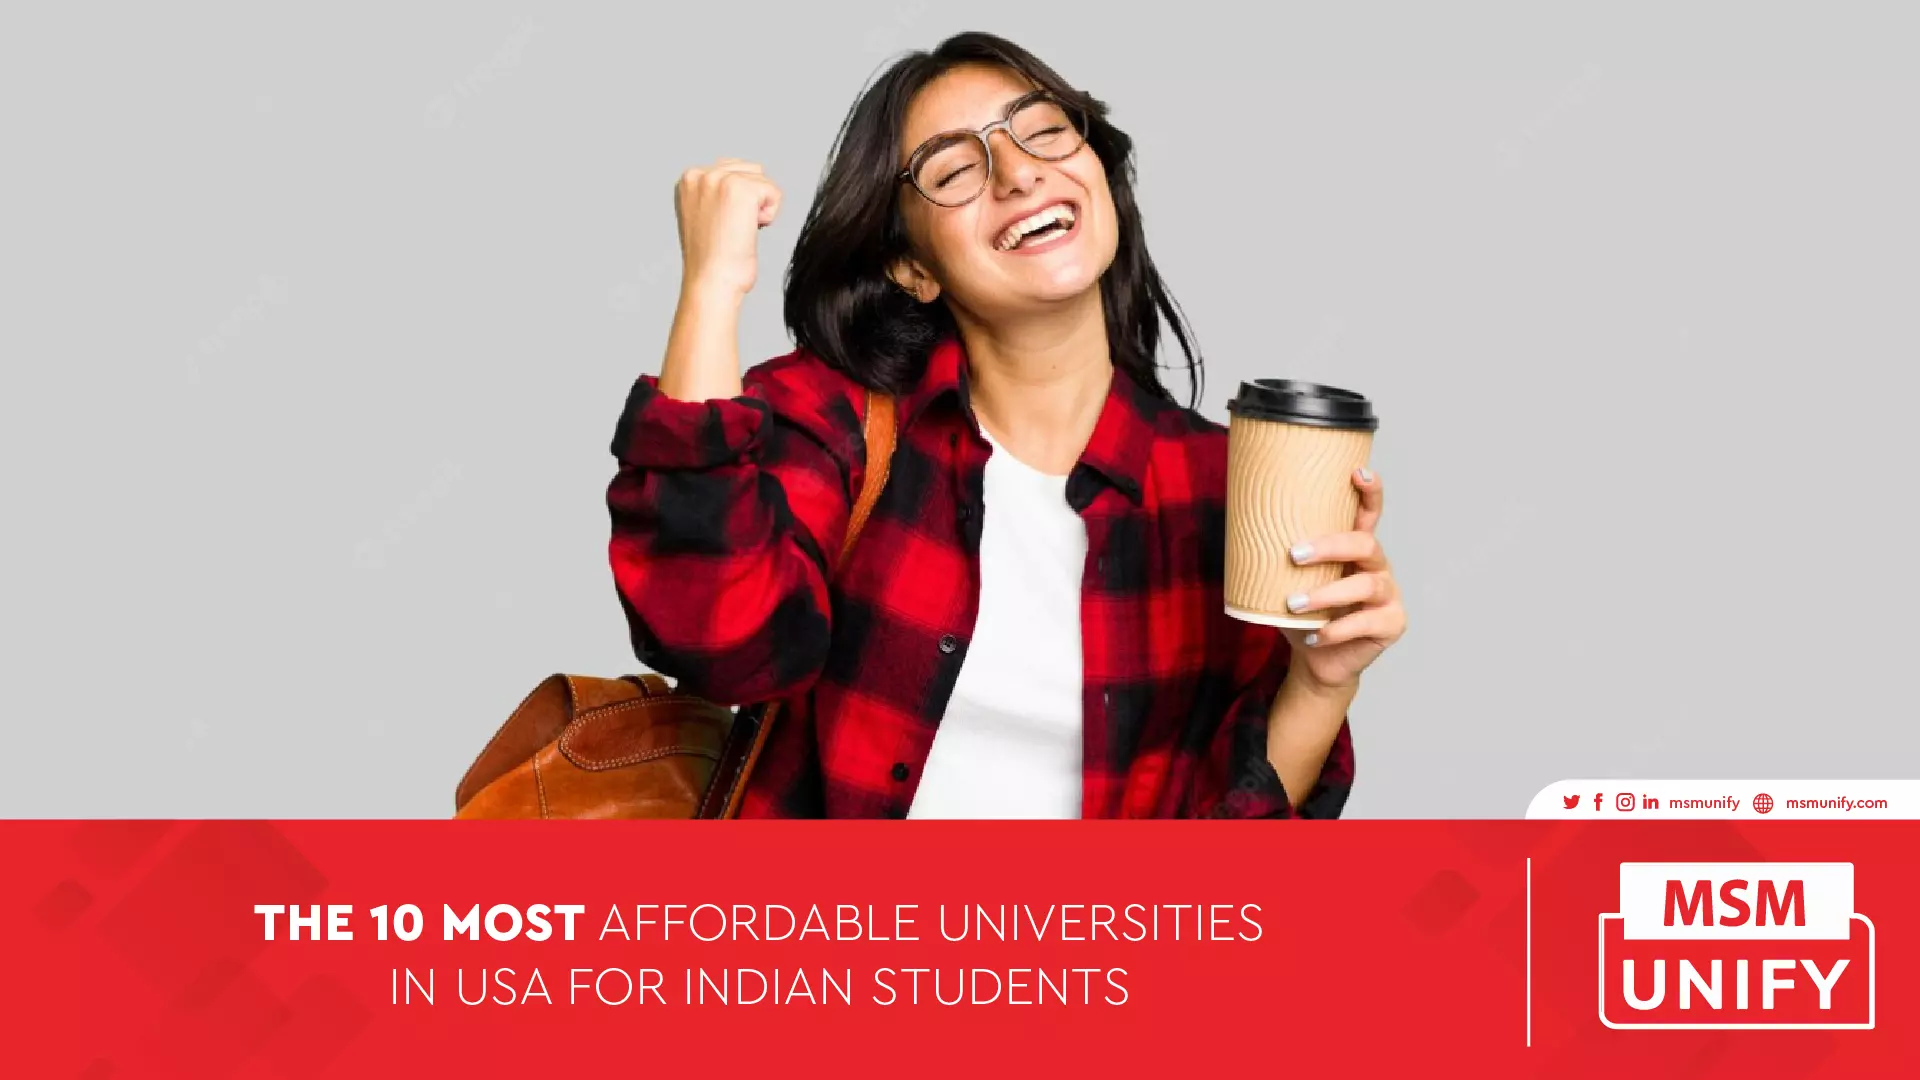 010423 MSM Unify The 10 Most Affordable Universities in USA for Indian Students 01